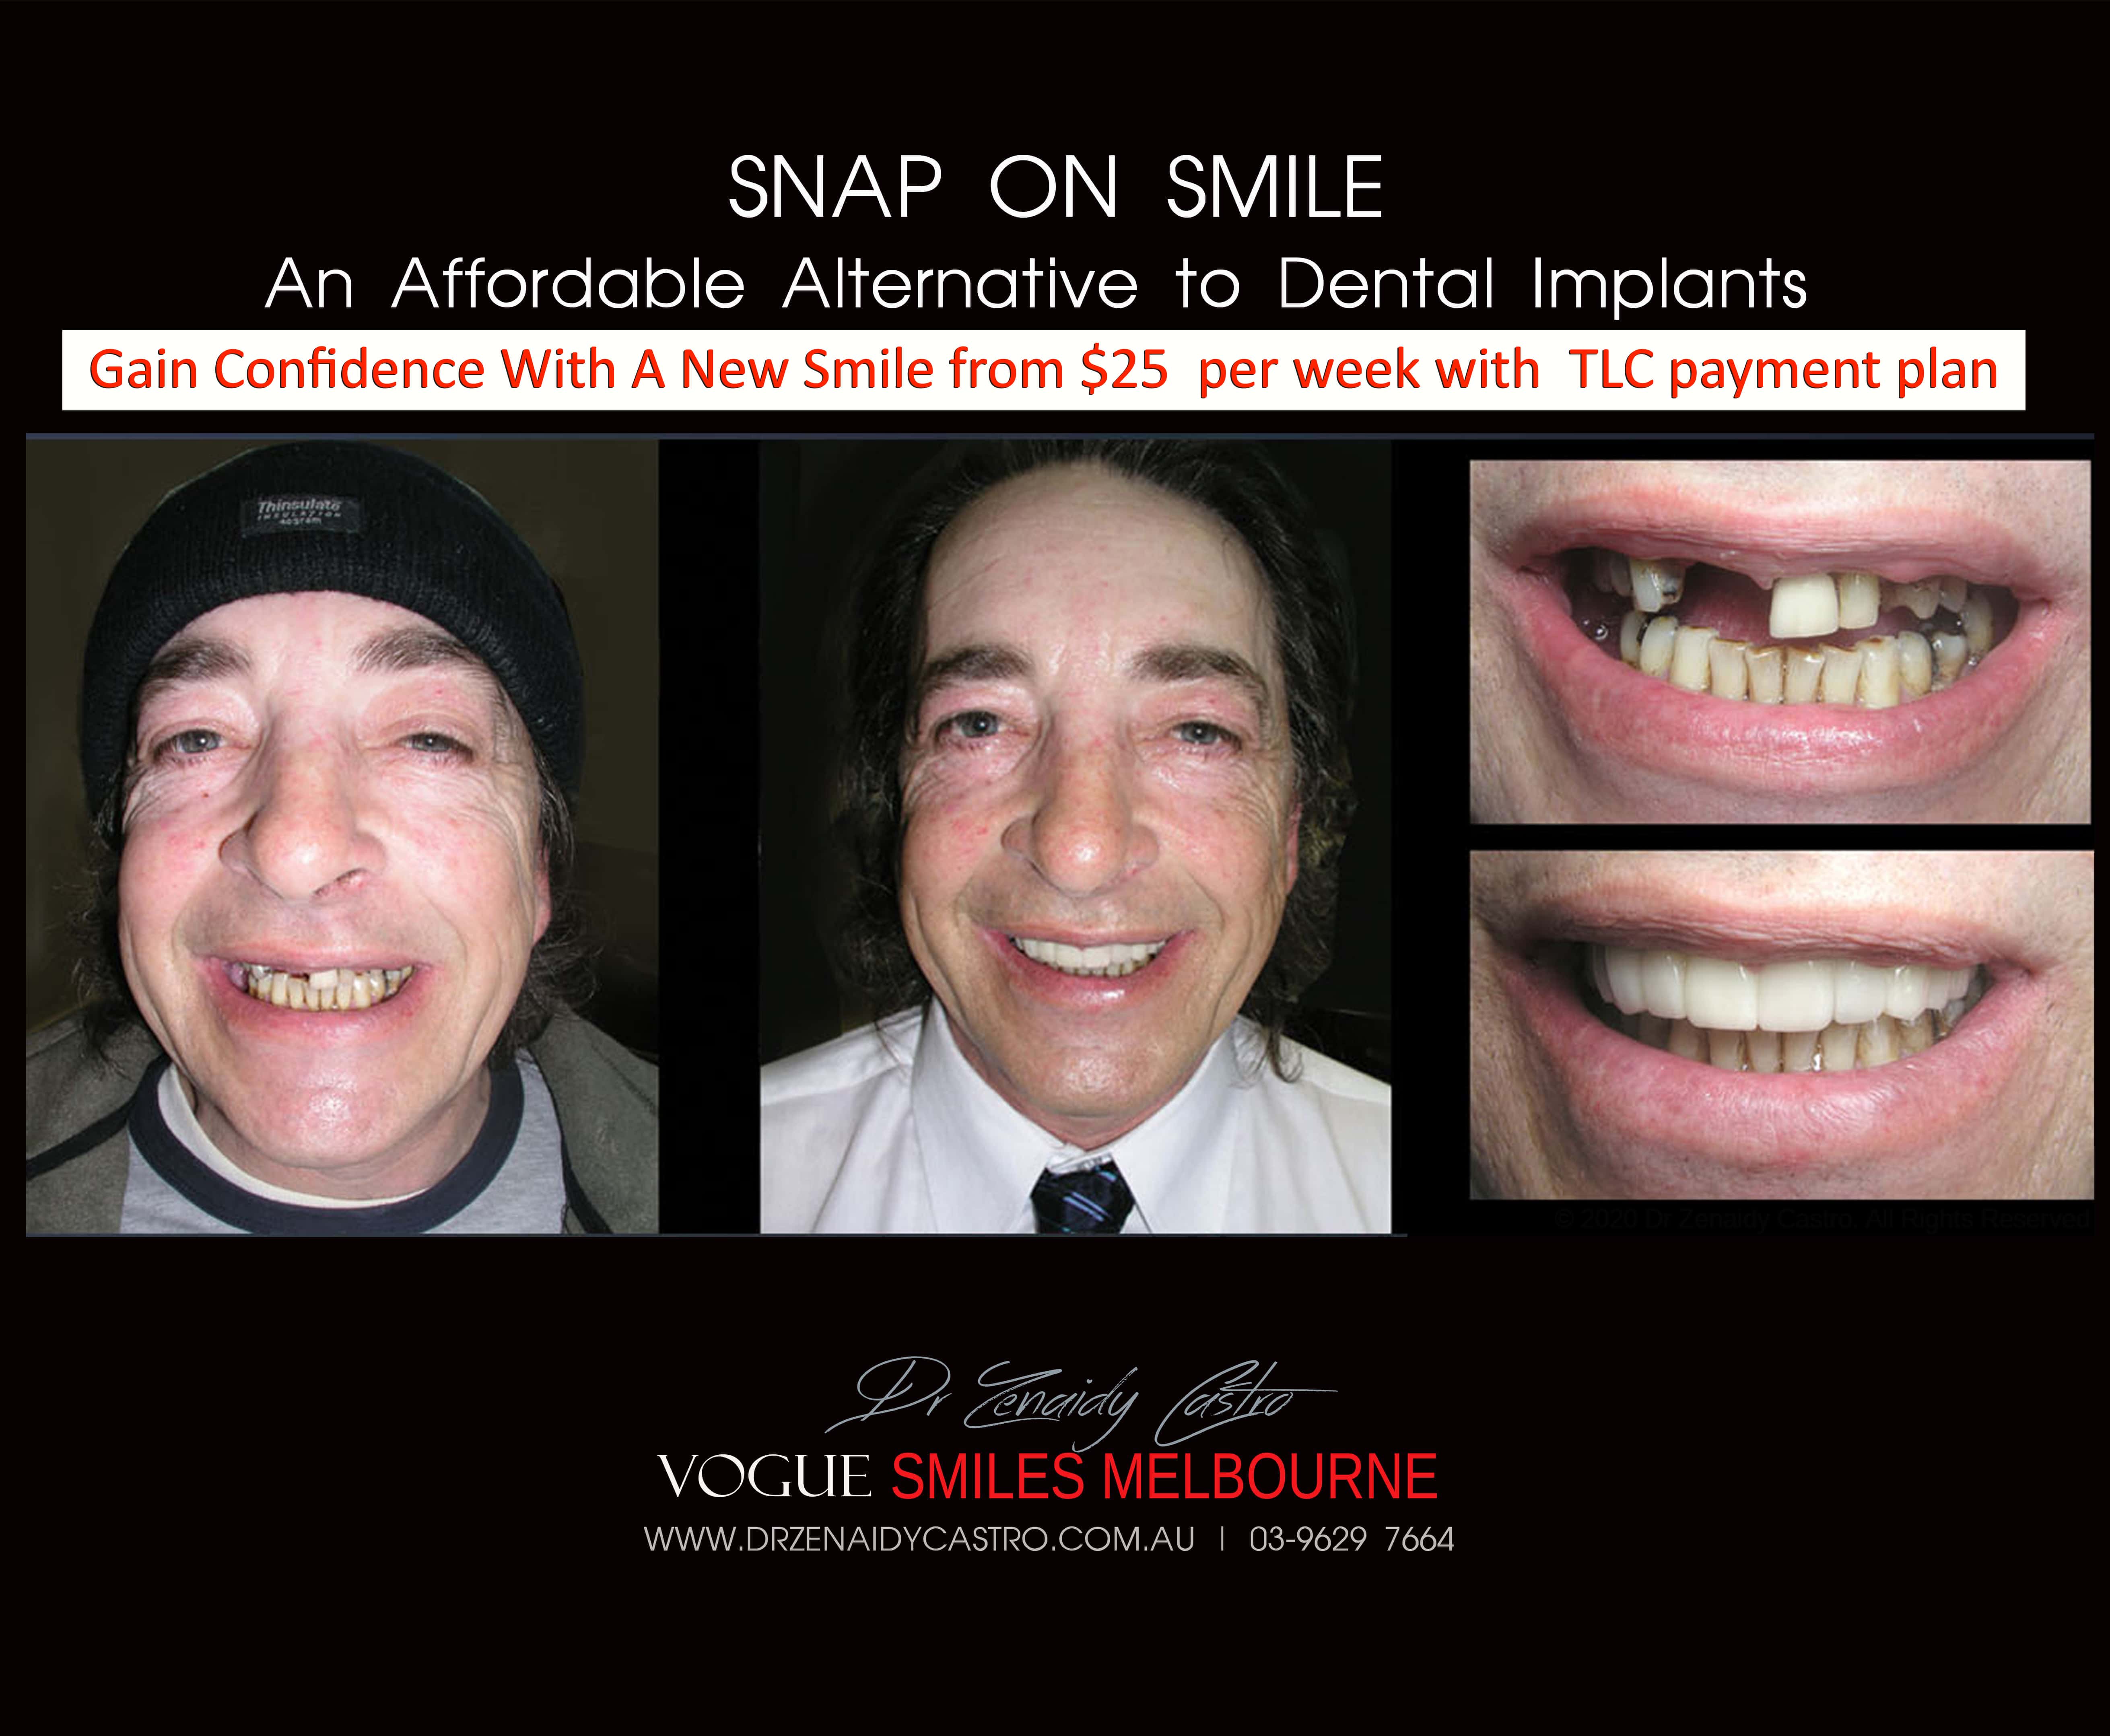 Cheaper alternative to Dental Implants, All-on 4 implants & Bridges in replacing missing teeth with Snap-on Smile Melbourne CBD- Cheap affordable Cosmetic Dentistry in Melbourne Victoria Australia